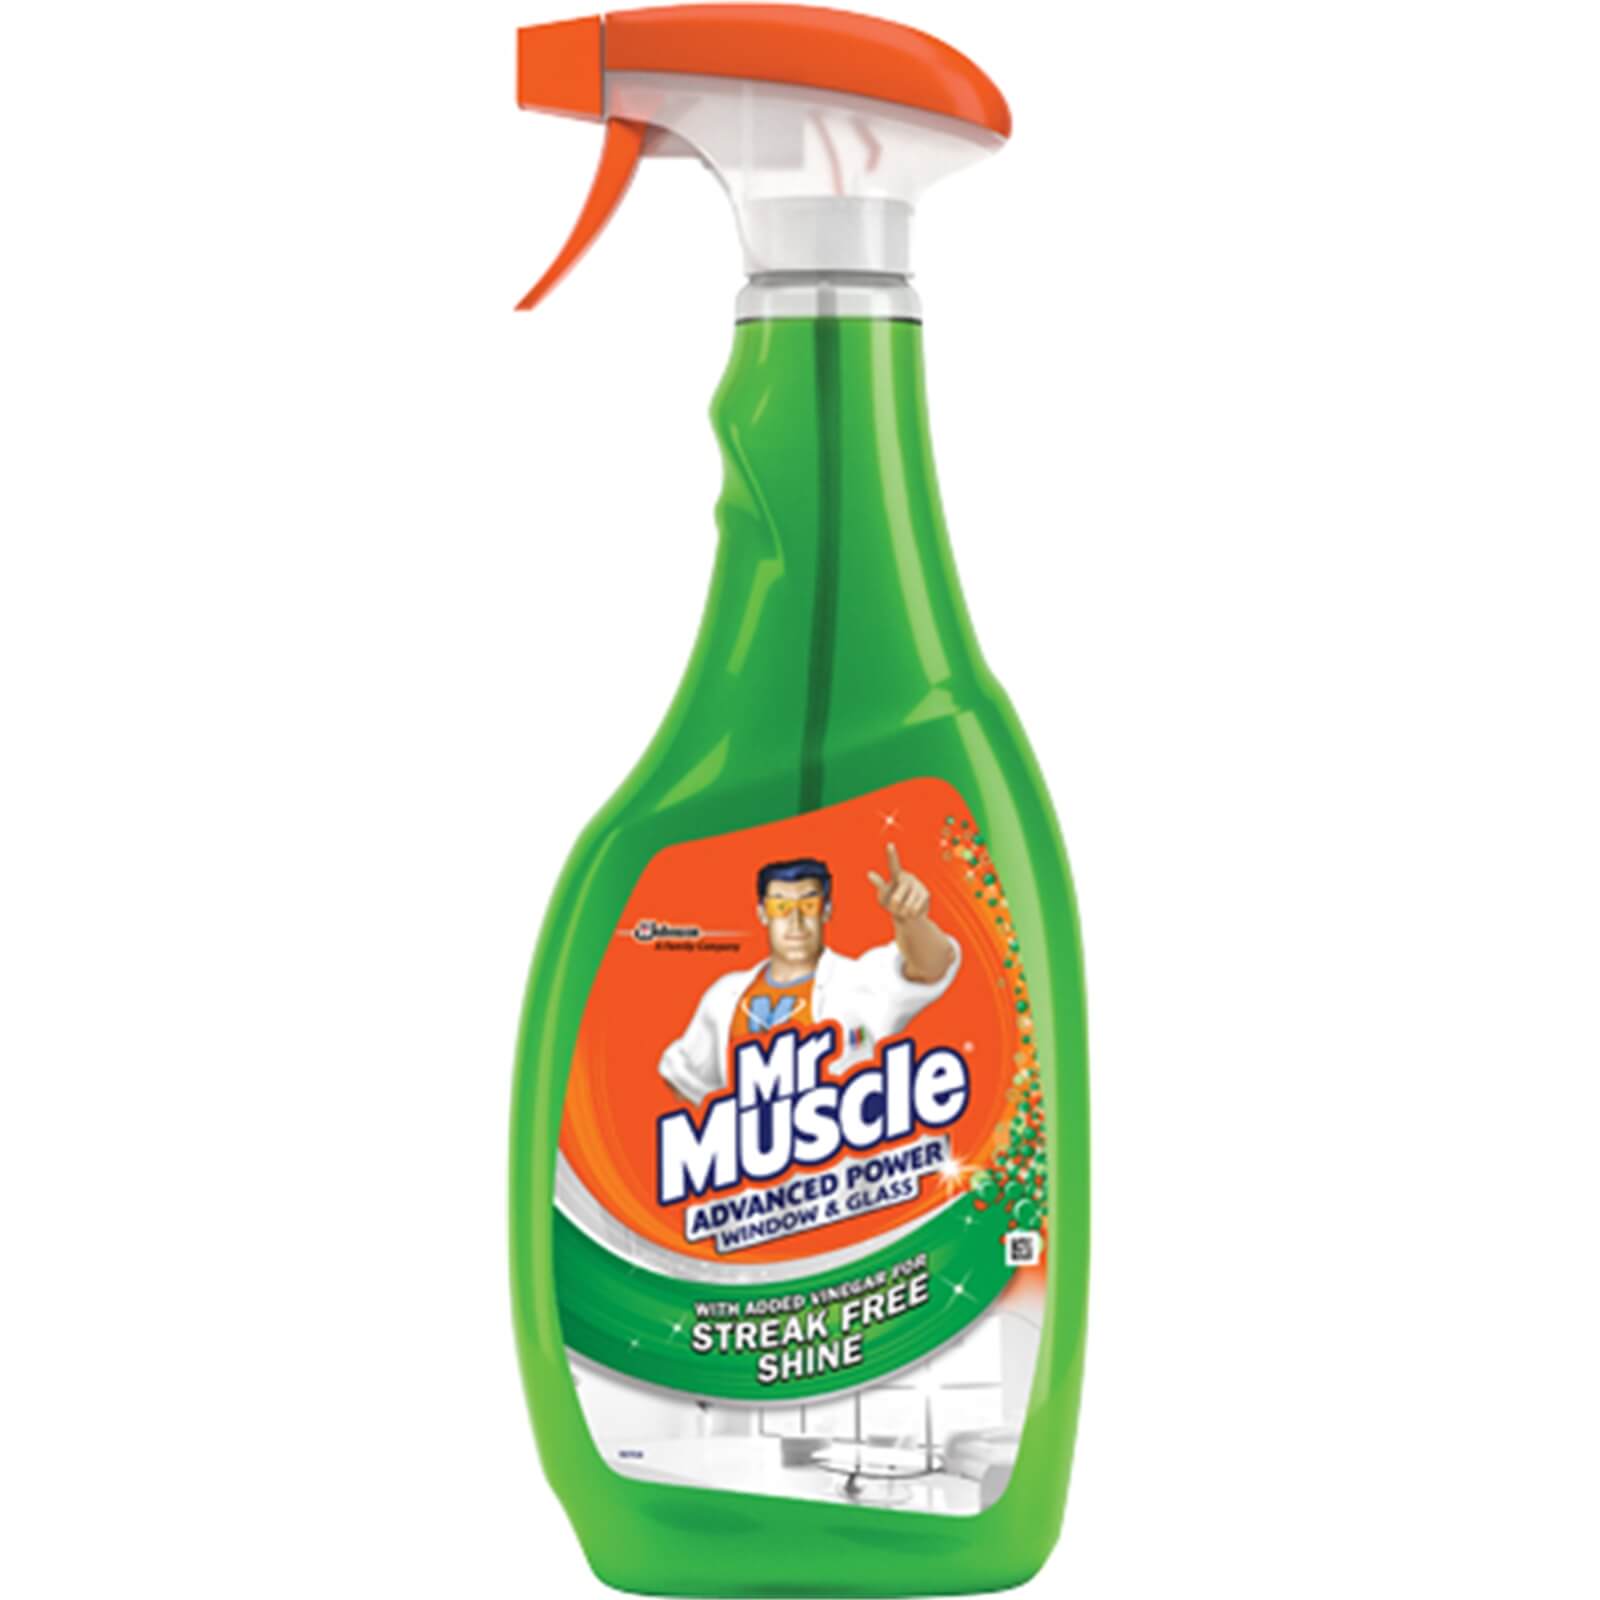 Mr Muscle Advanced Power Window & Glass Cleaner